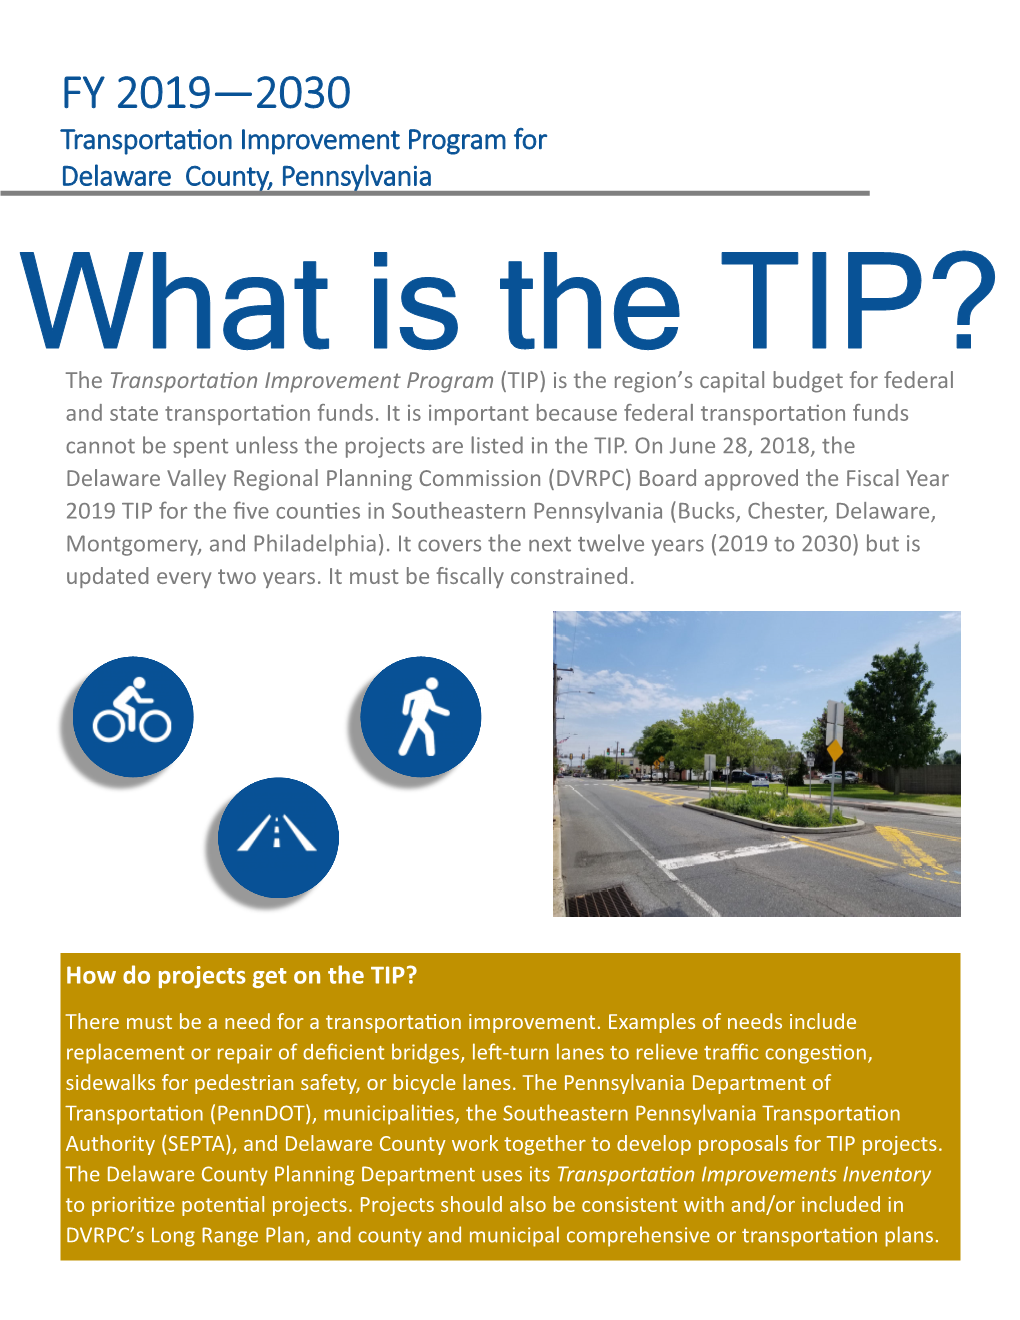 What Is the TIP? the Transporta�On Improvement Program (TIP) Is the Region’S Capital Budget for Federal and State Transporta�On Funds